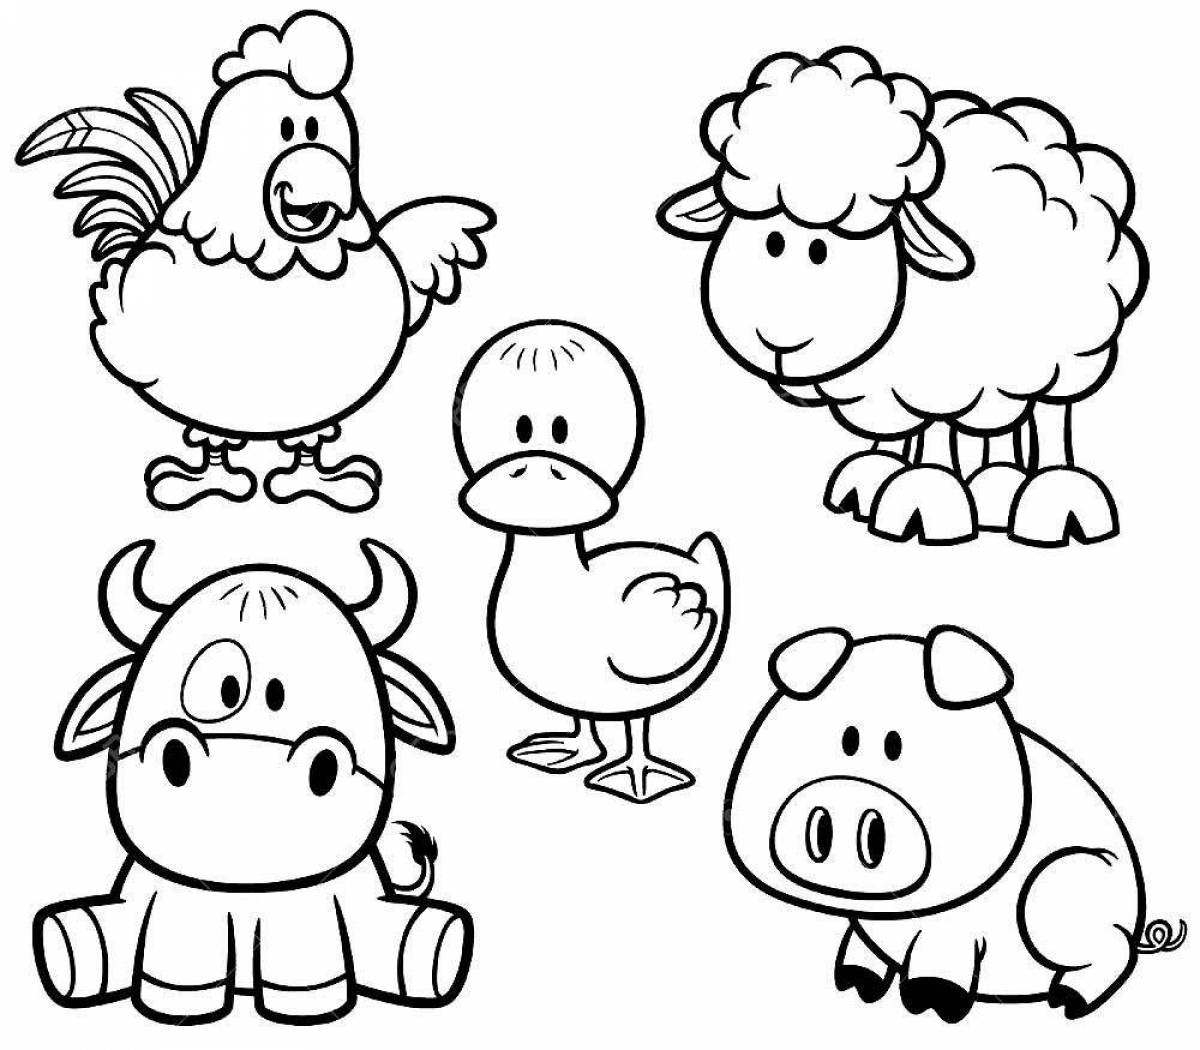 Cute pet coloring book for kids 2-3 years old